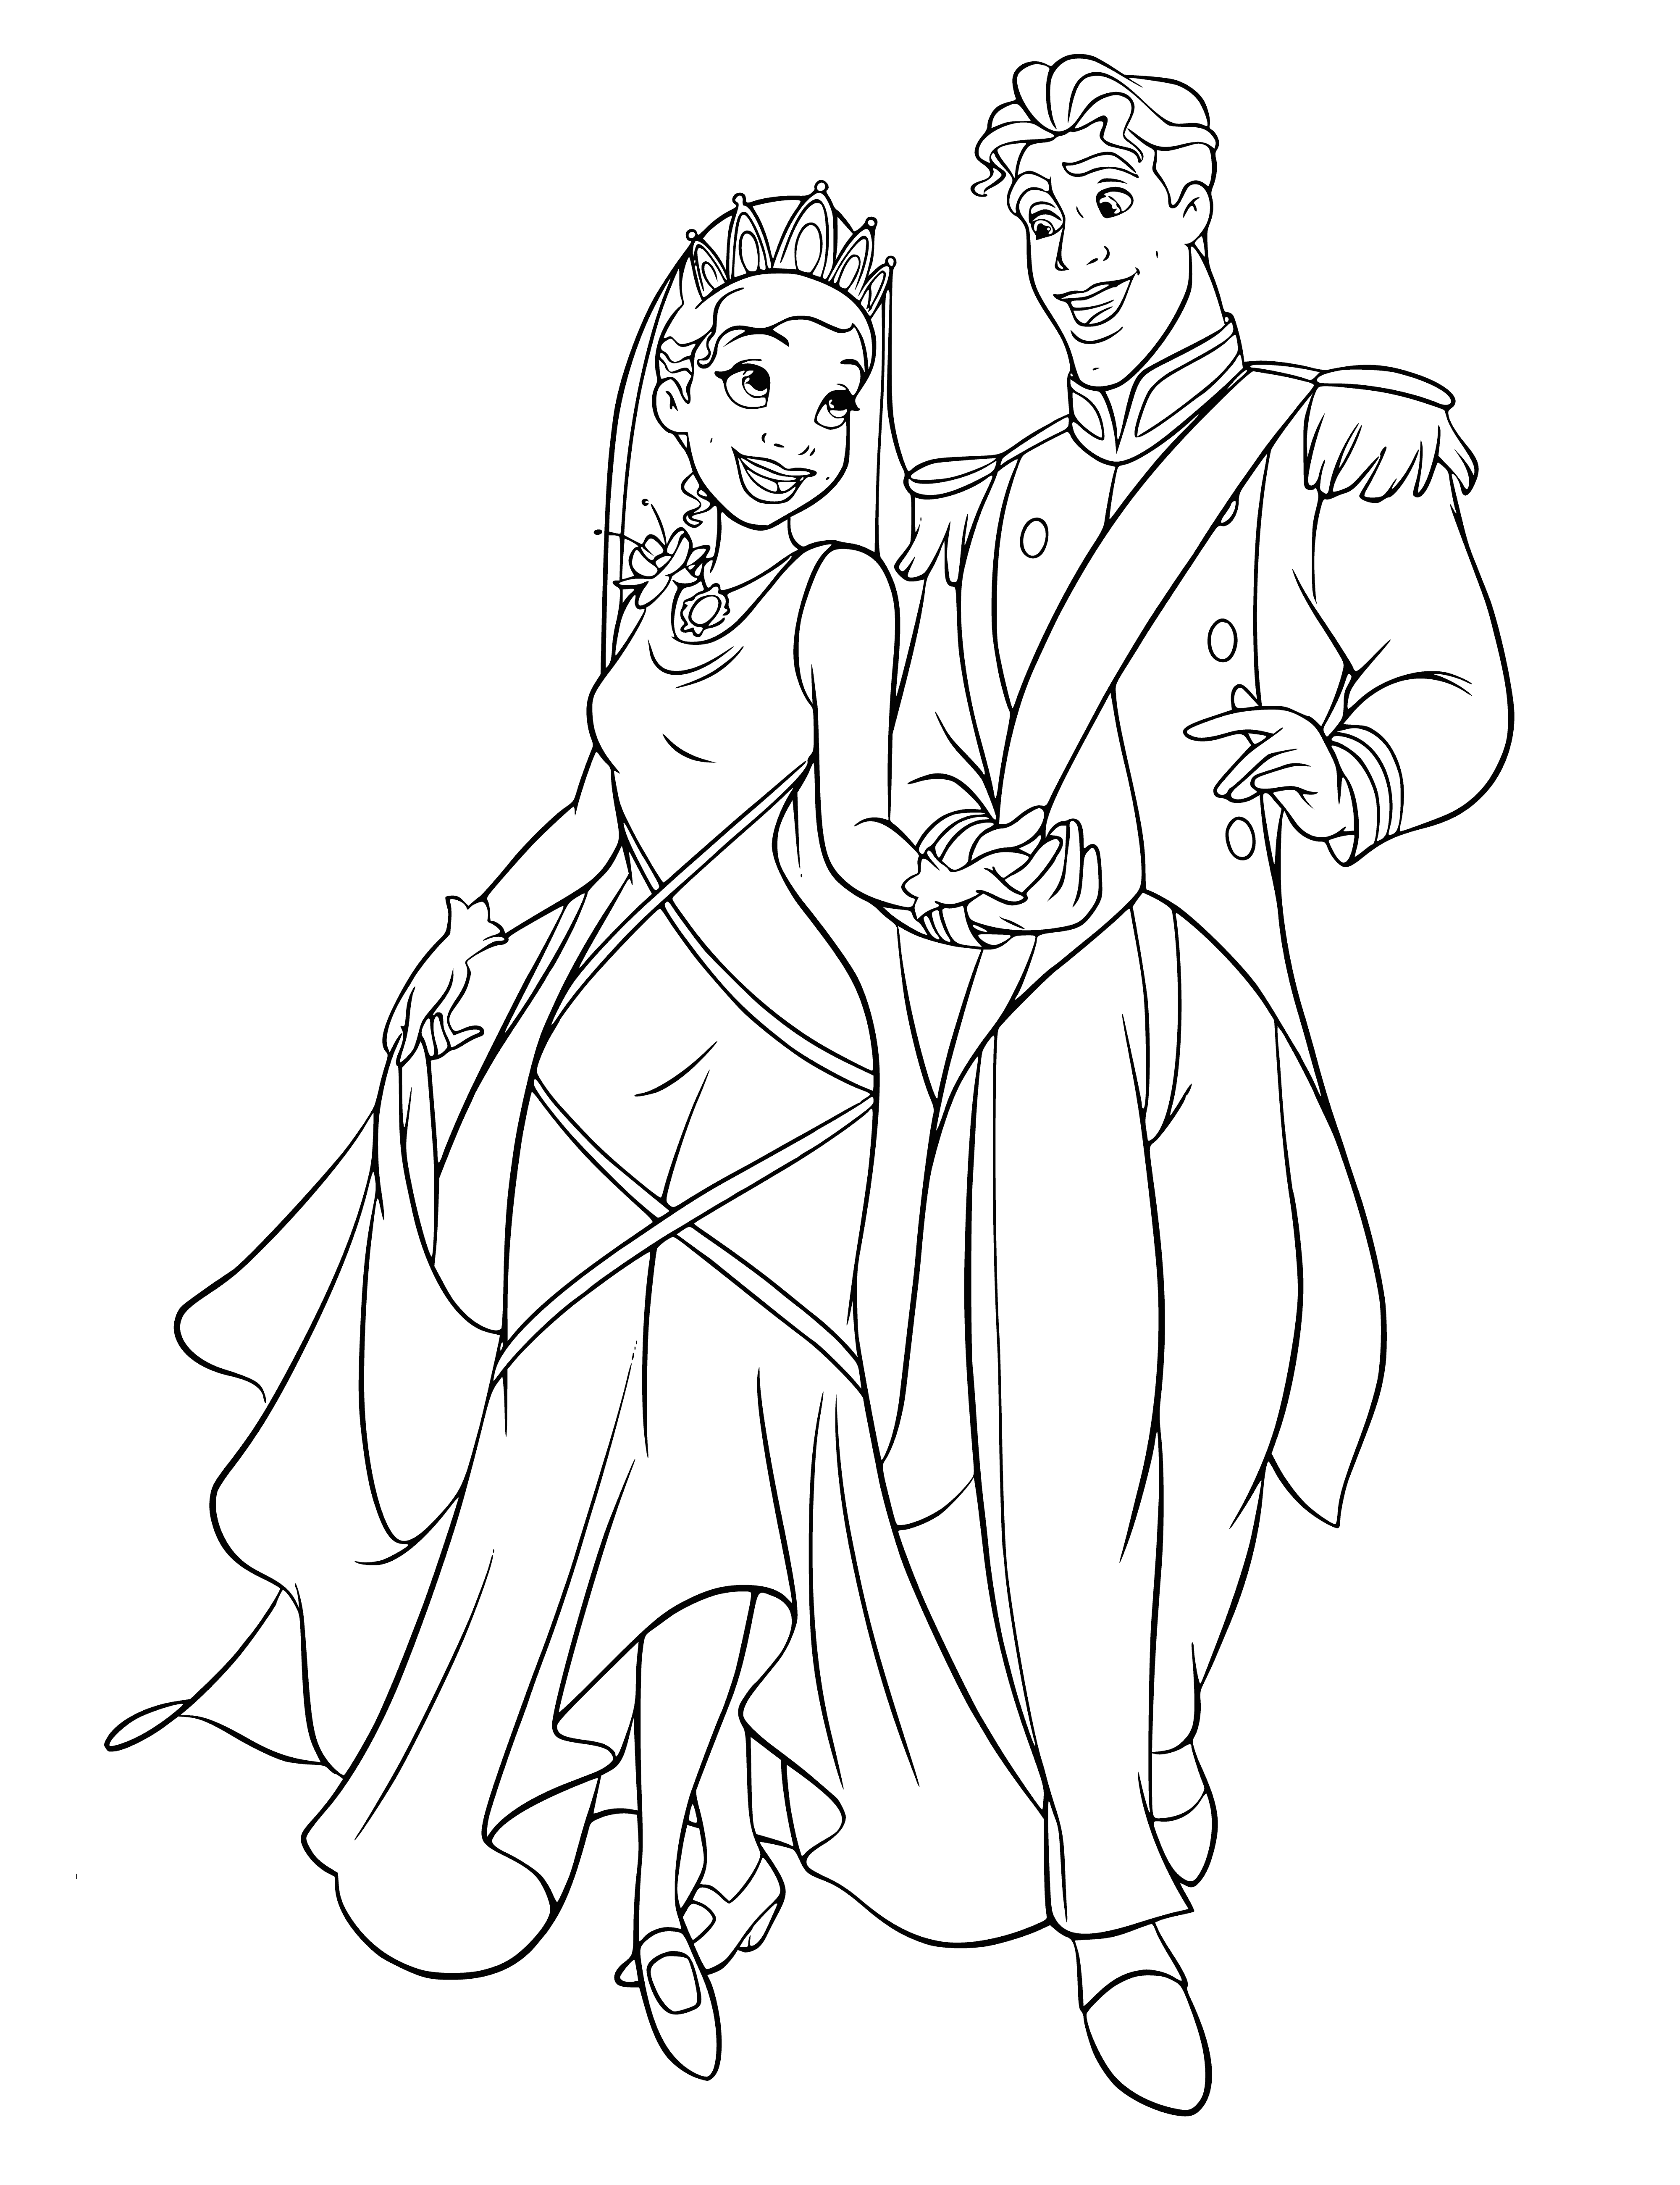 coloring page: Two people in a loving embrace, surrounded by friends & family beneath a large tree. He in a suit, she in white, smiles & joy all around.